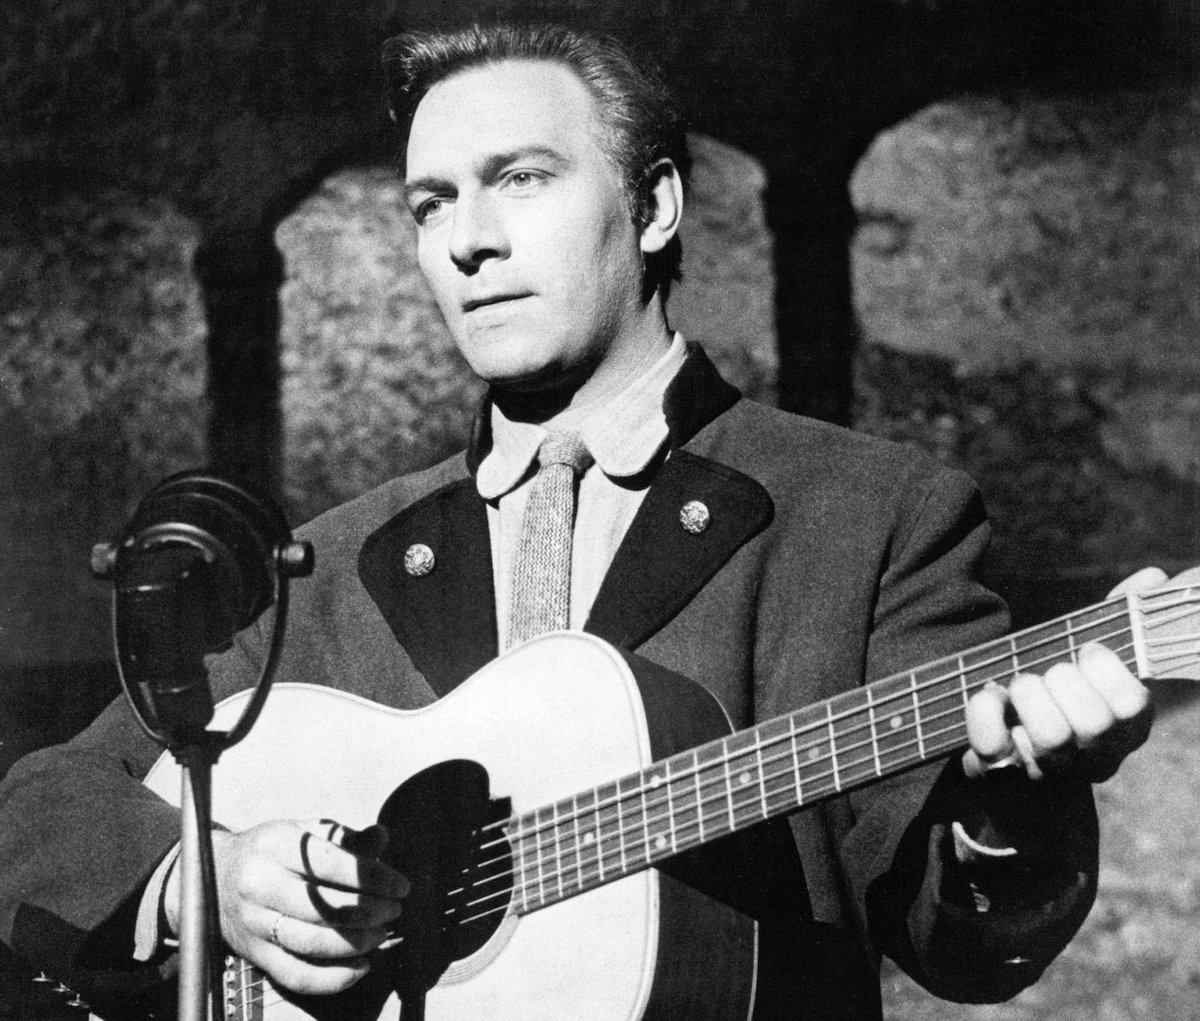 Christopher Plummer, as Captain Georg von Trapp, playing a guitar in 'The Sound of Music' | Silver Screen Collection/Getty Images